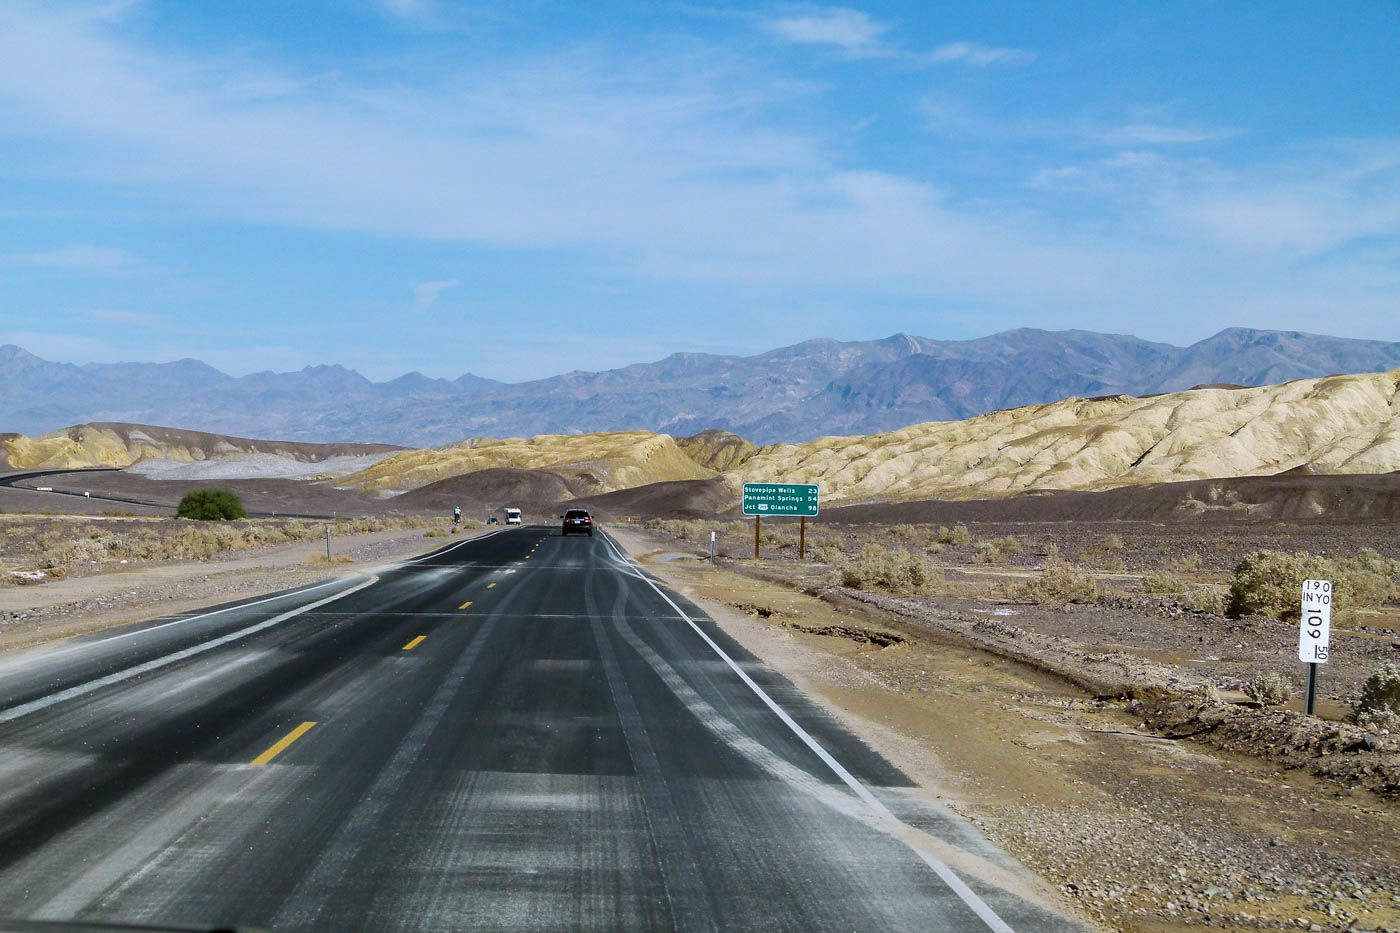 Death Valley National Park Travel Costs & Prices - Camping, Stovepipe Wells, Furnace Creek